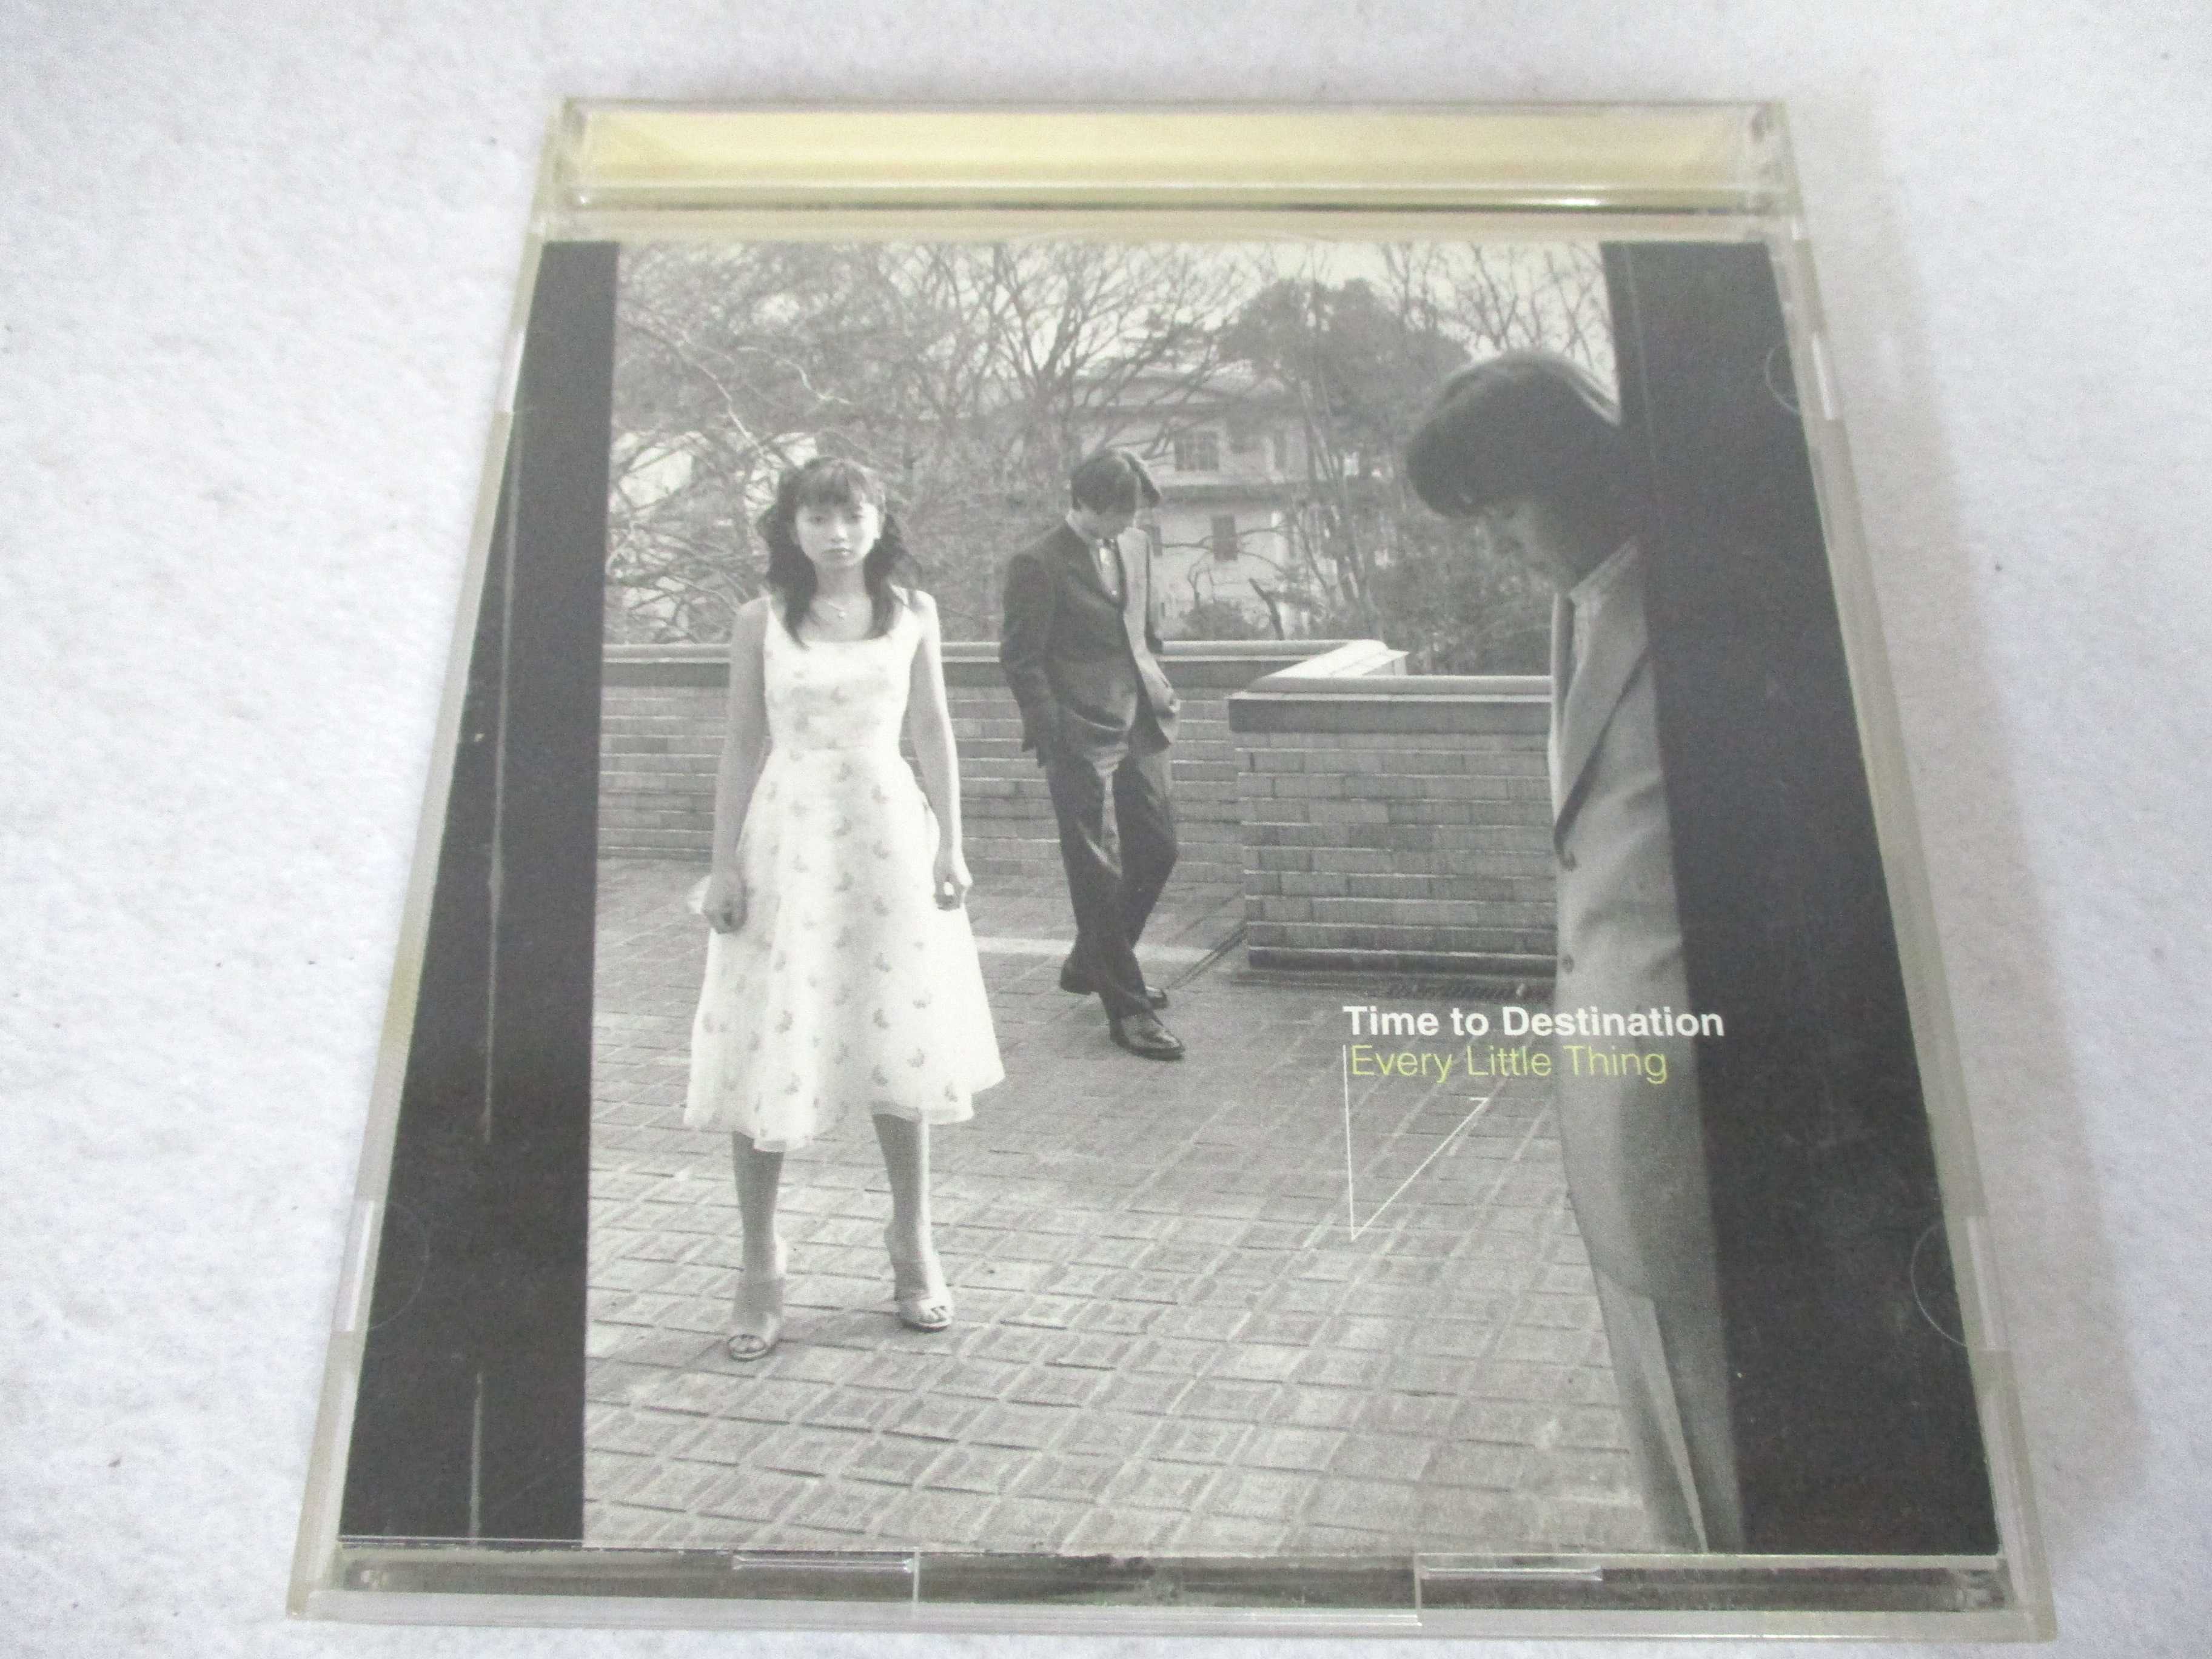 AC02419 【中古】 【CD】 Time to Destination/Every Little Thing